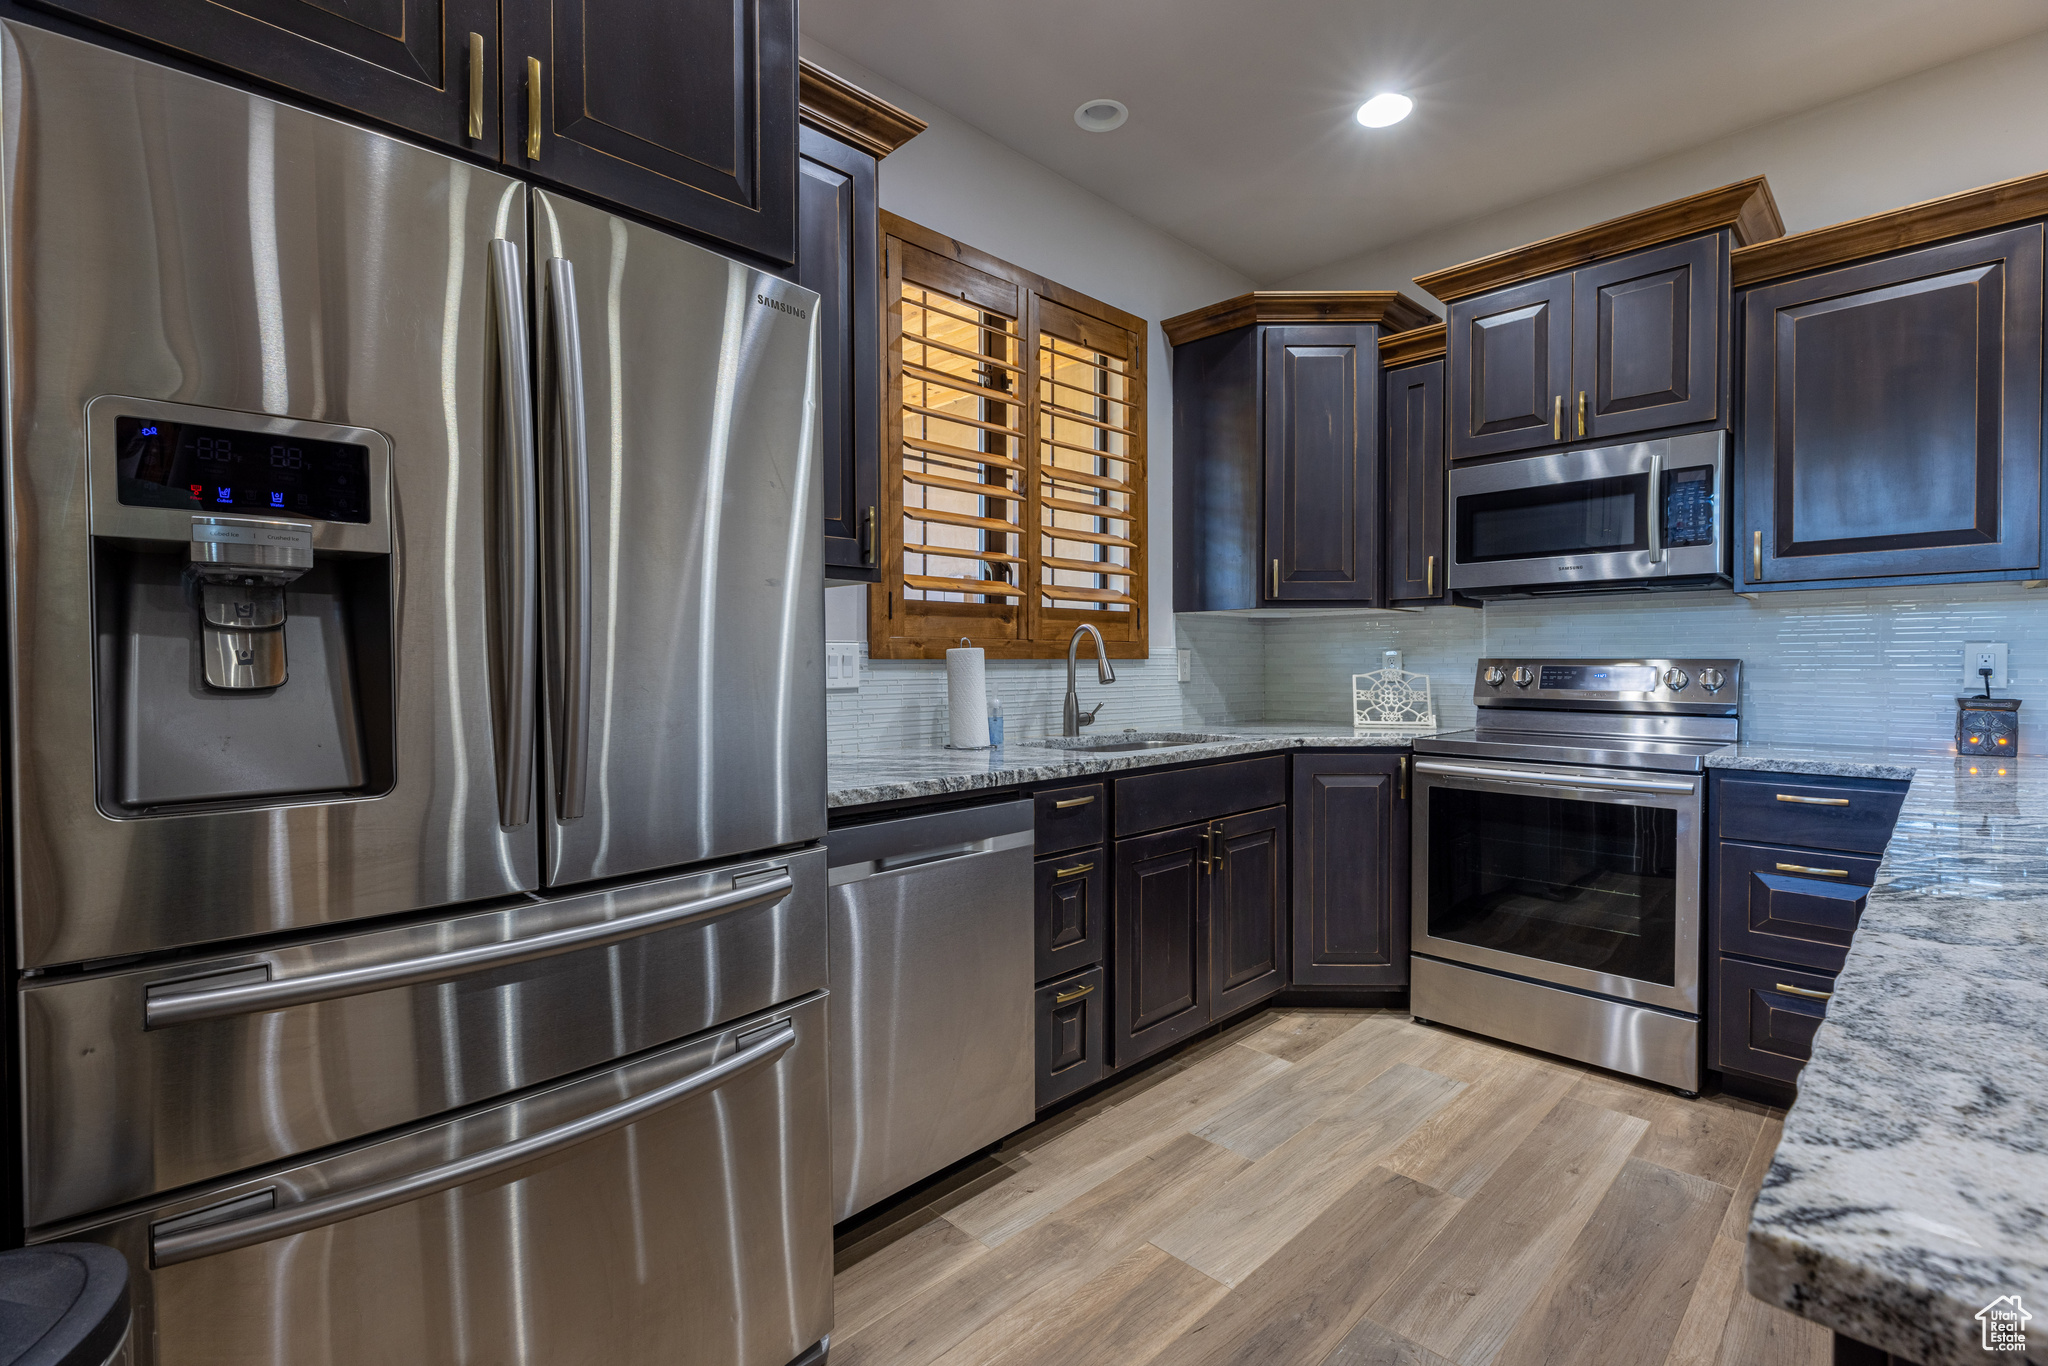 Guest casita featureing a full Kitchen with appliances with stainless steel finishes, sink, light stone counters, tasteful backsplash, and light hardwood / wood-style floors